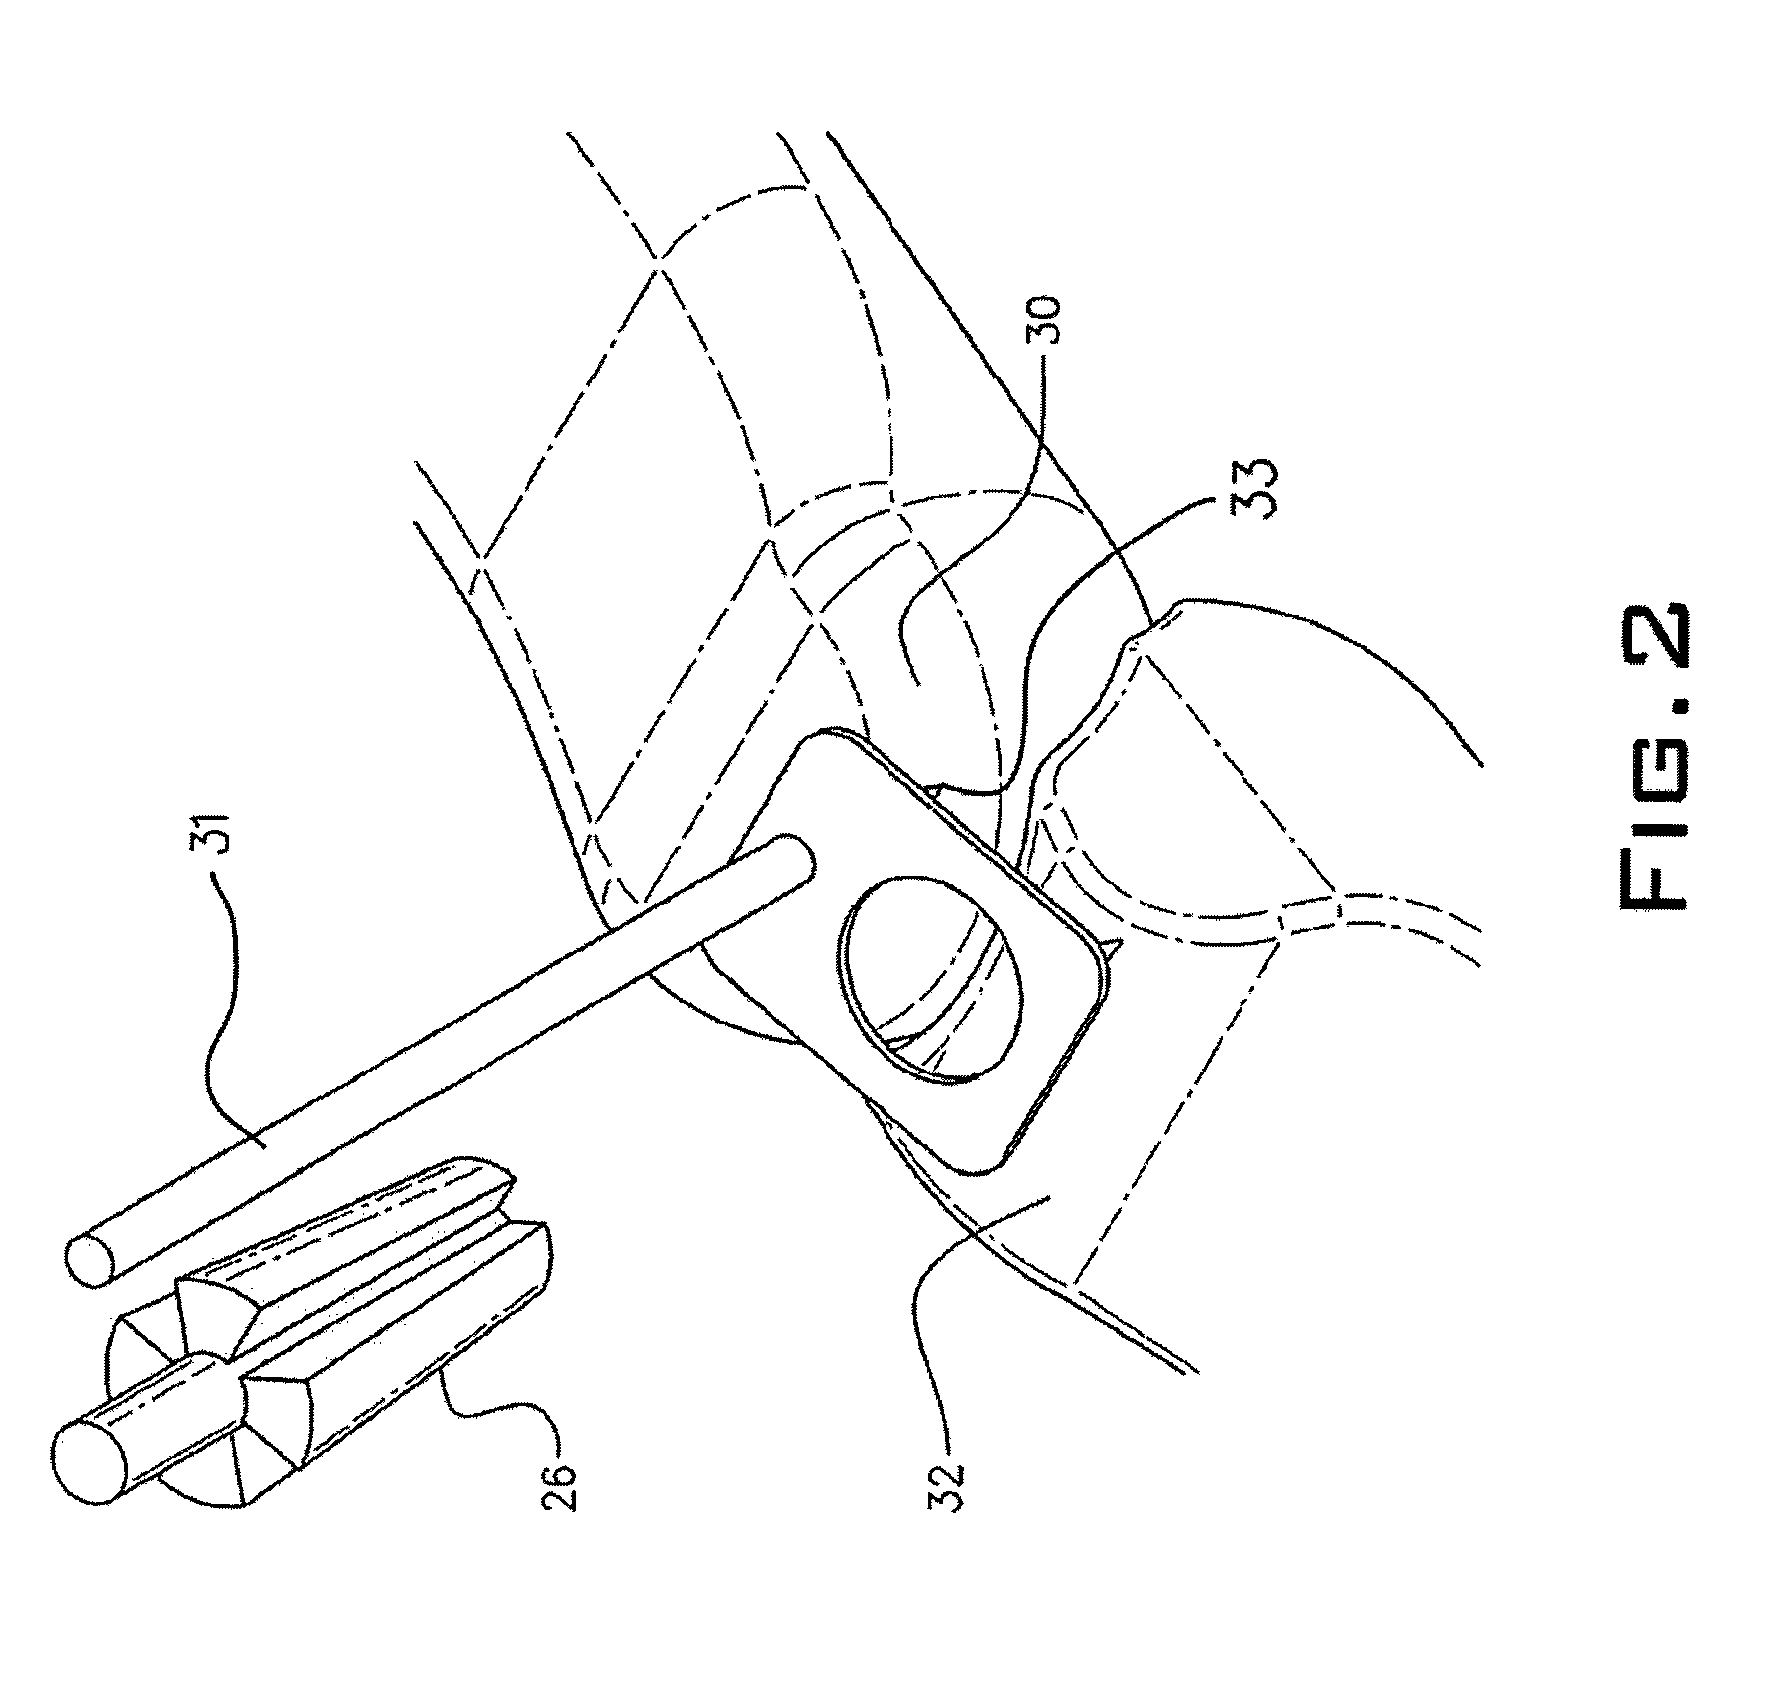 Spinal plug for a minimally invasive facet joint fusion system